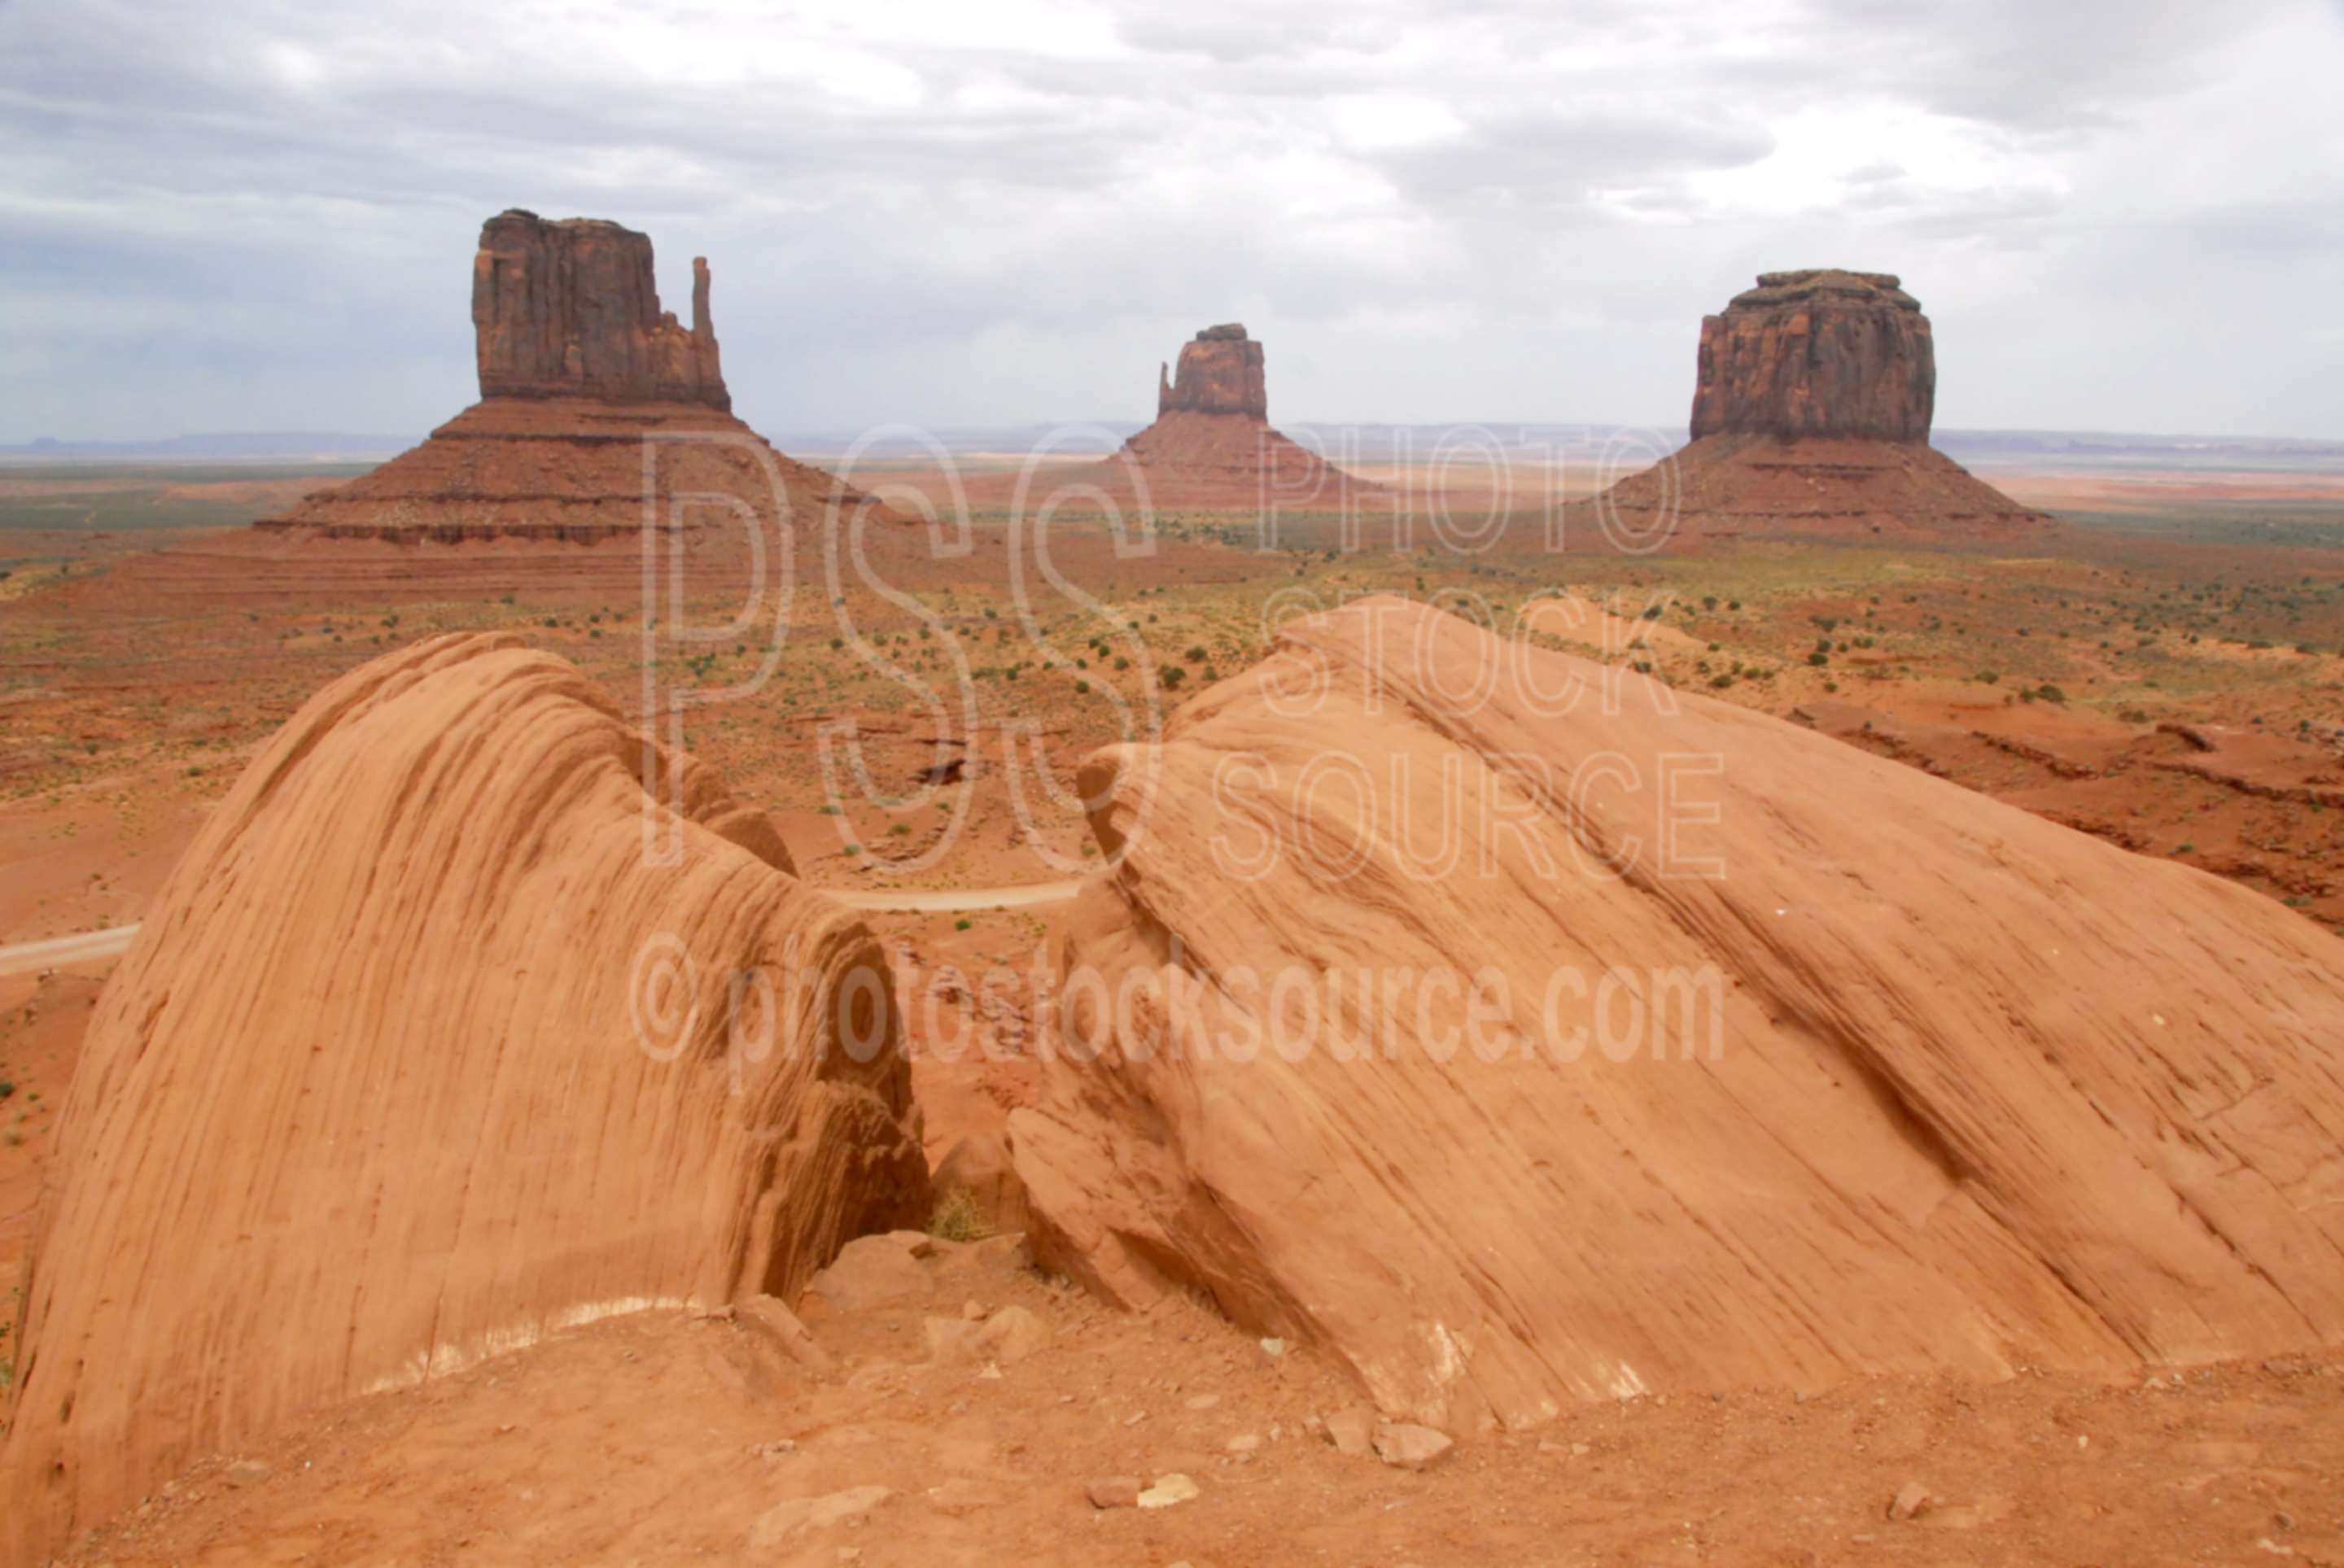 The Mittens,hoodoos,mesa,rocks,red rock,erosion,landforms,wild west,mittens,buttes,national park,nature,national parks,native american